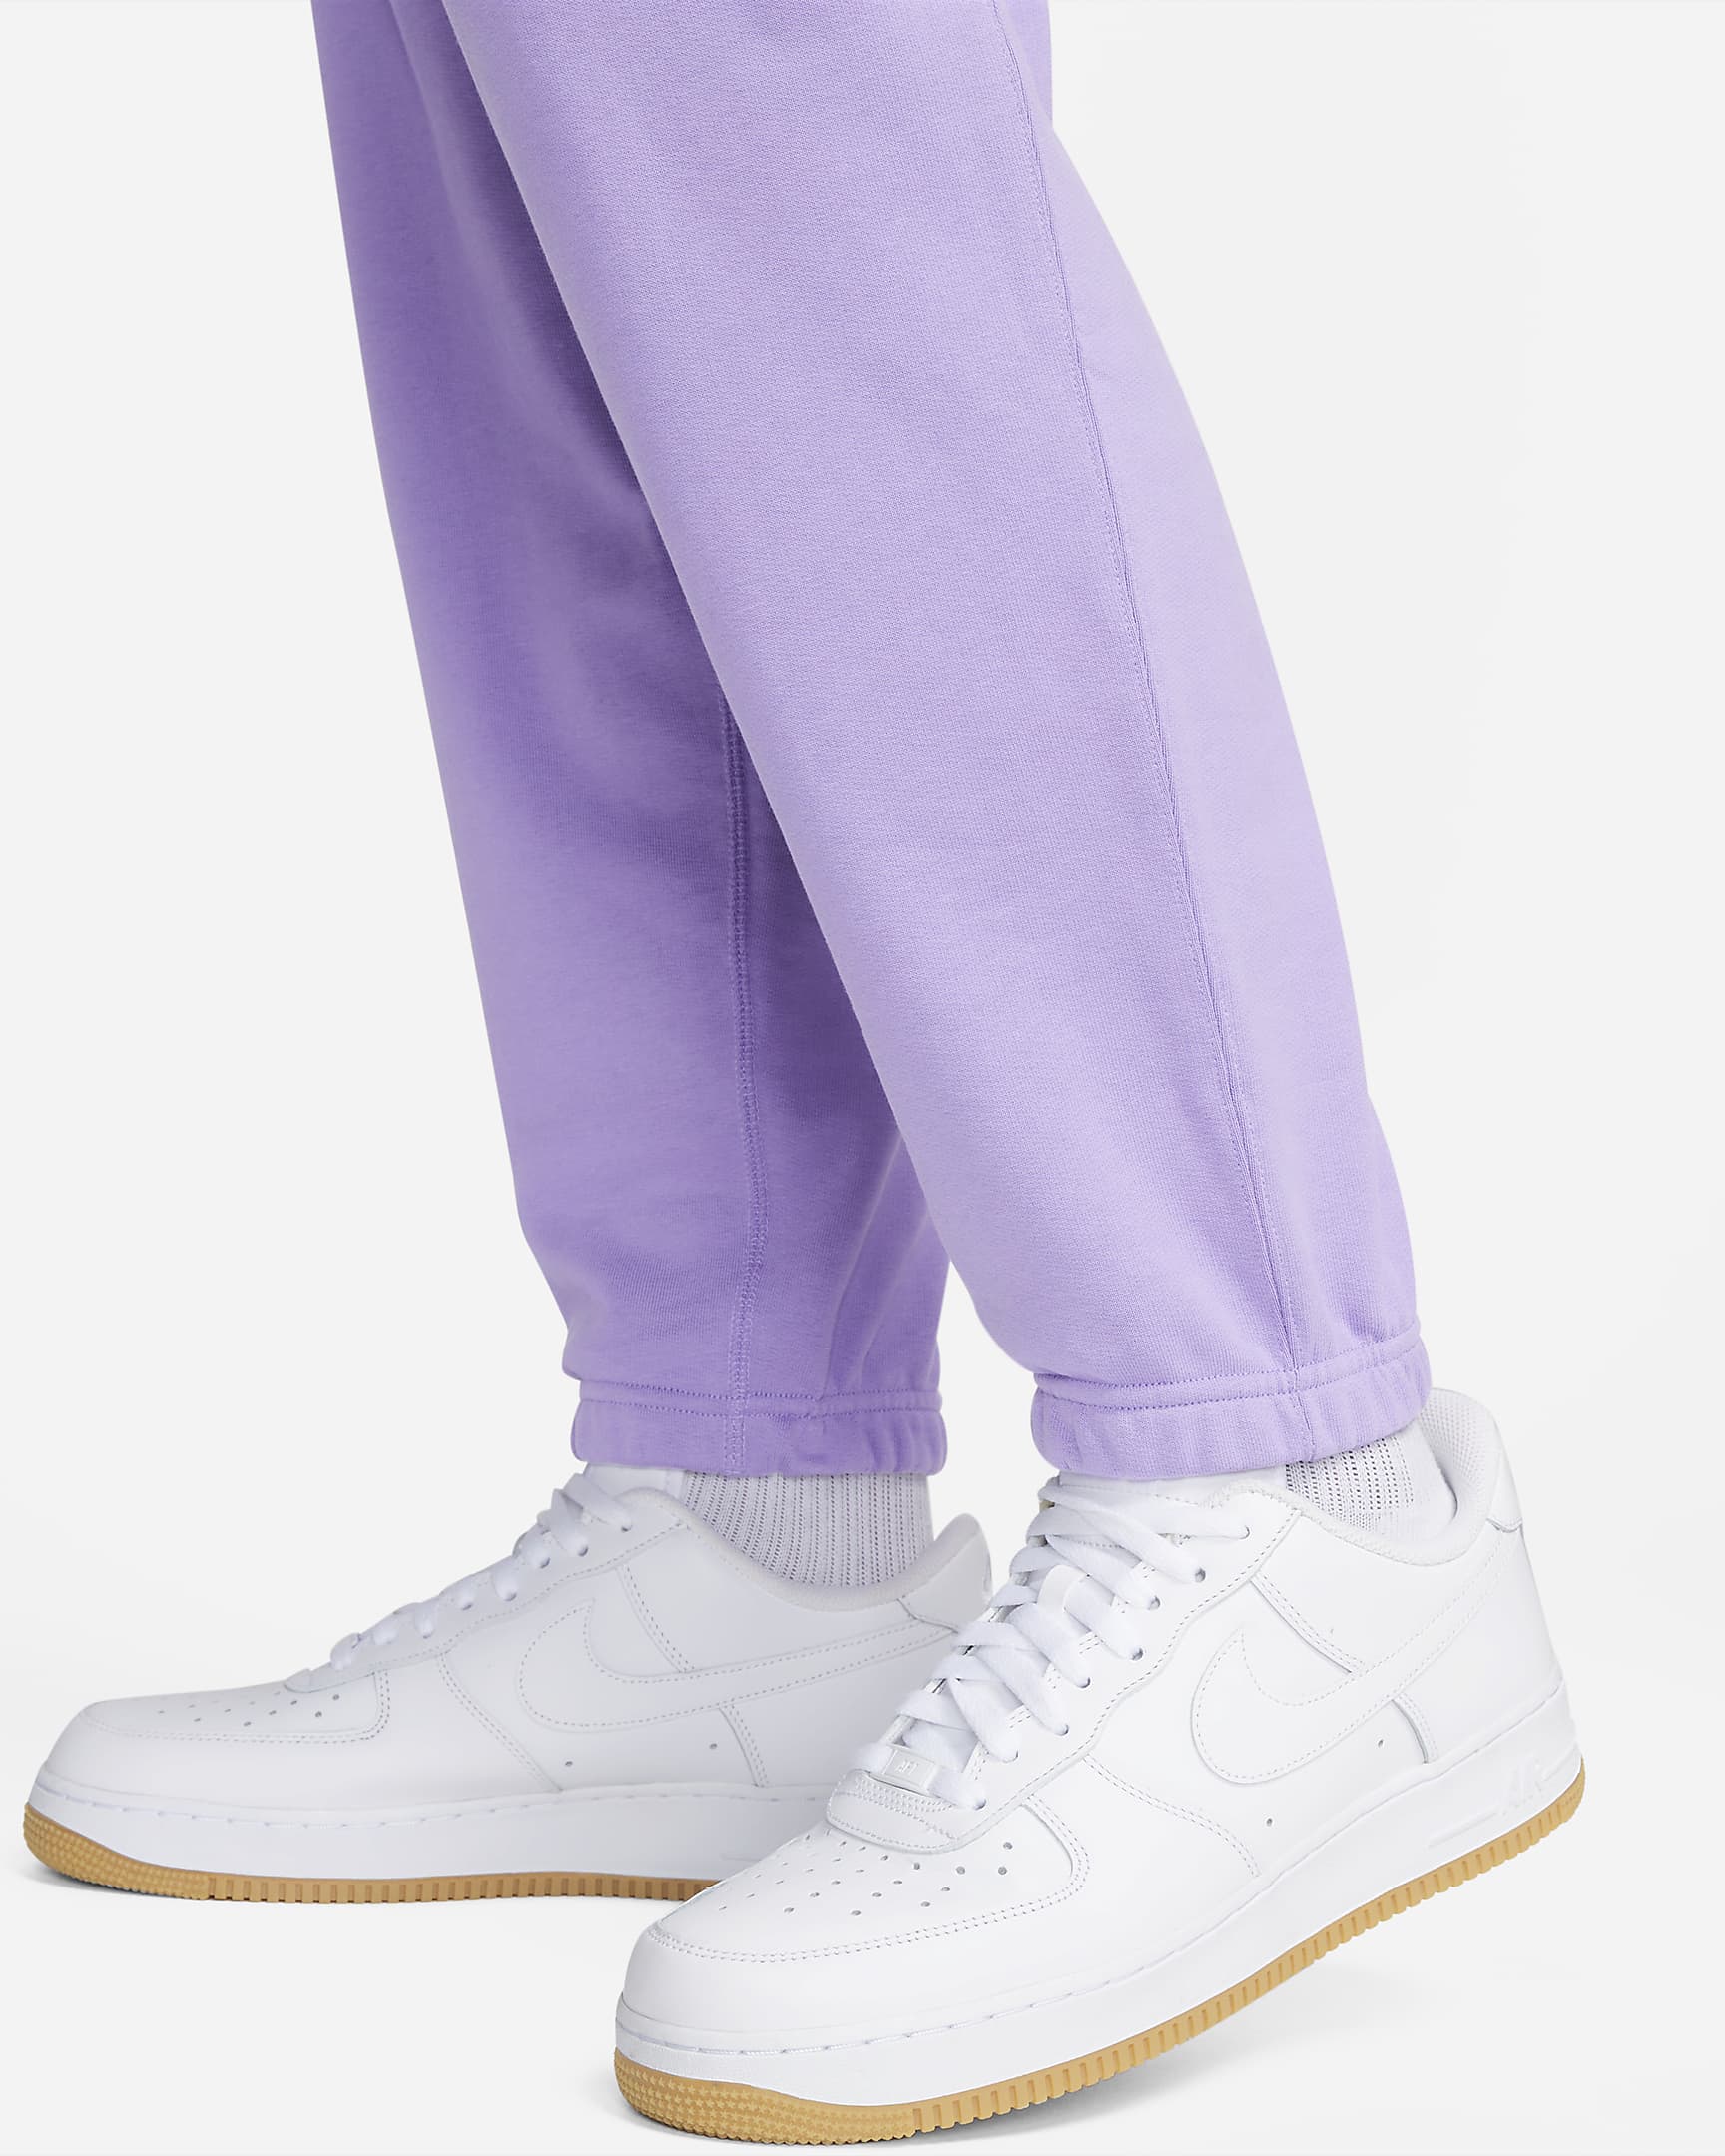 Nike Solo Swoosh Men's French Terry Trousers. Nike SK